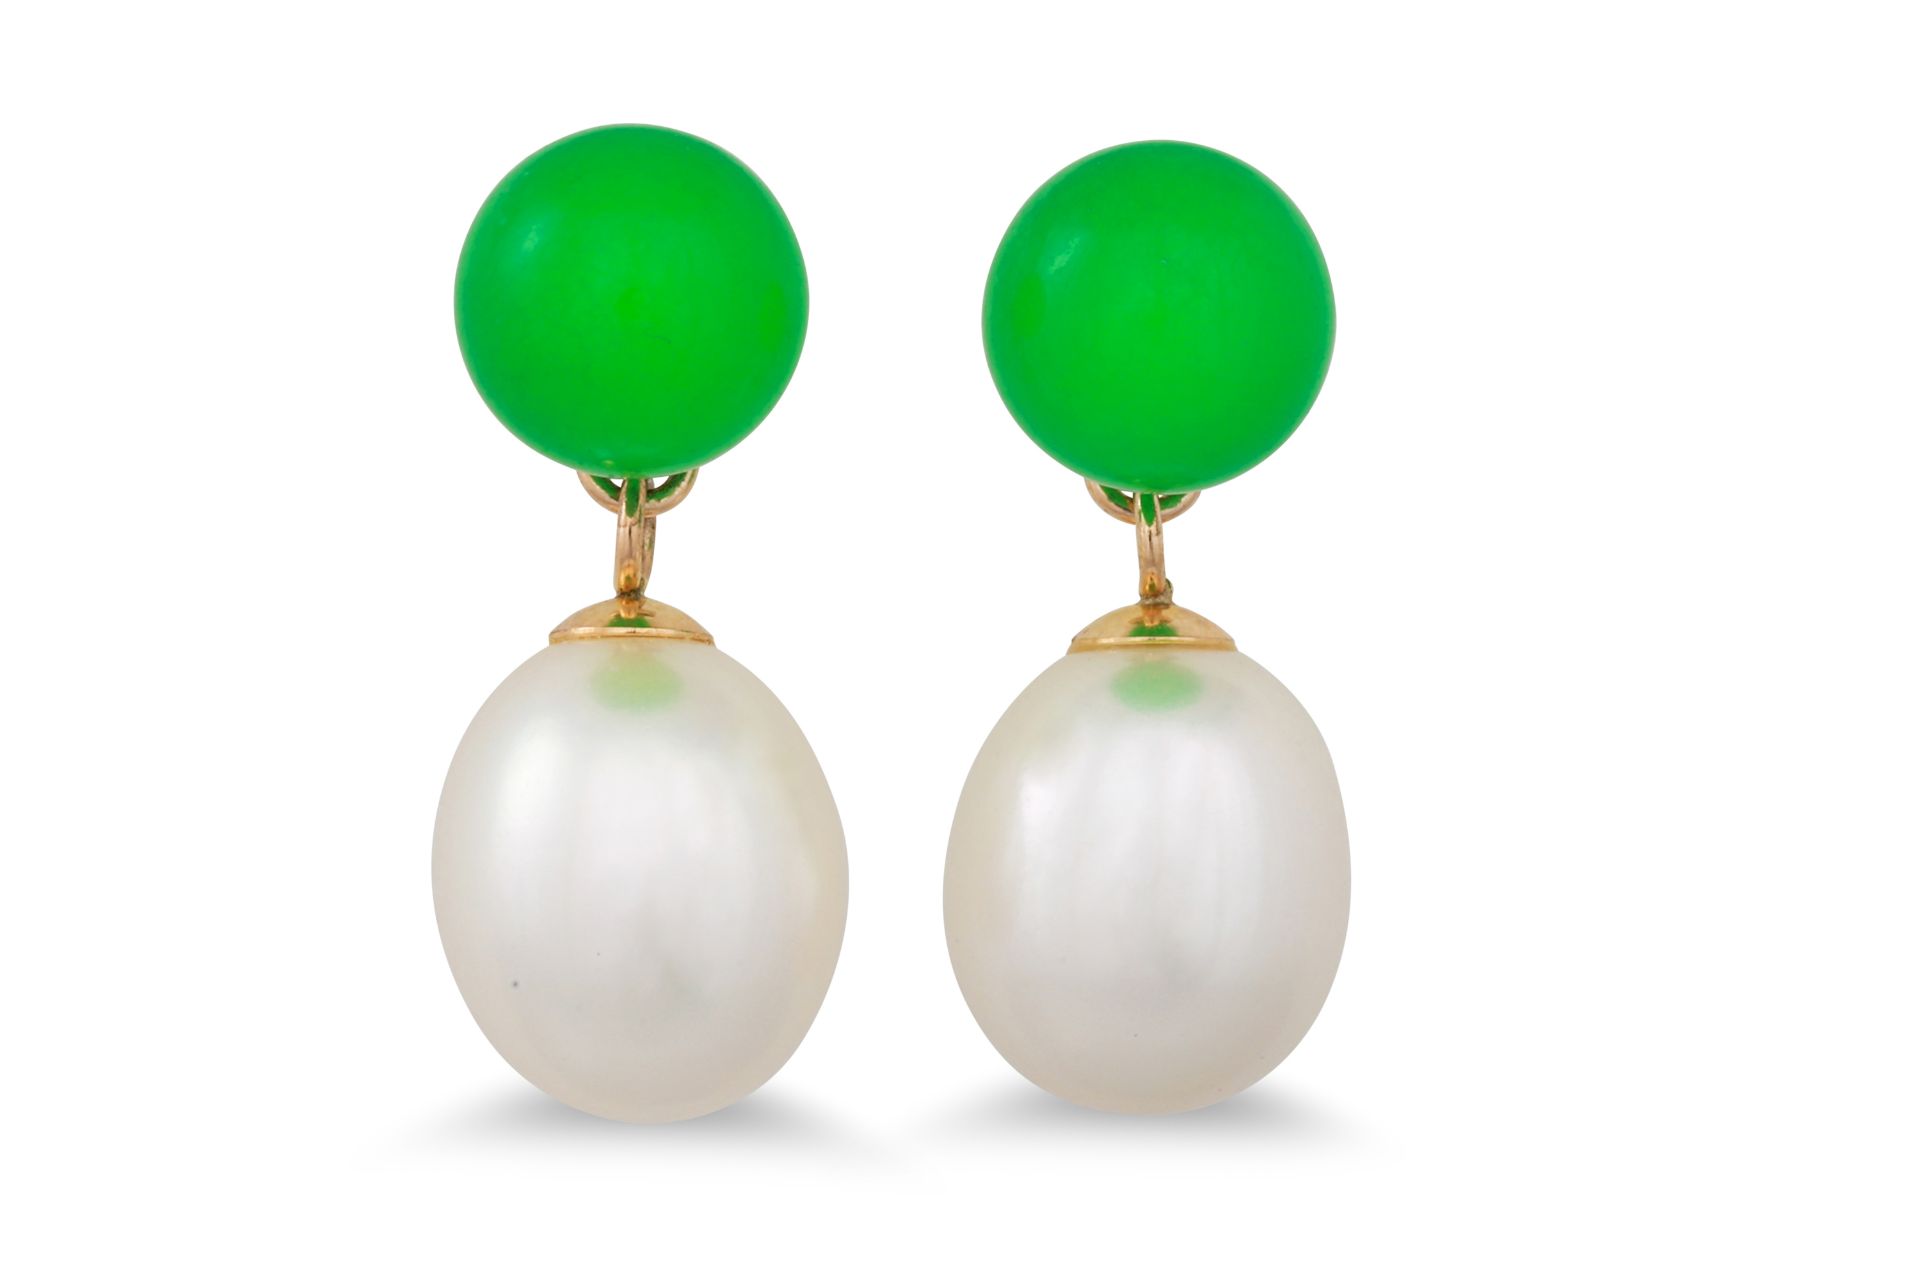 A PAIR OF PEARL DROP EARRINGS, with green gemstones, to 9ct gold fittings